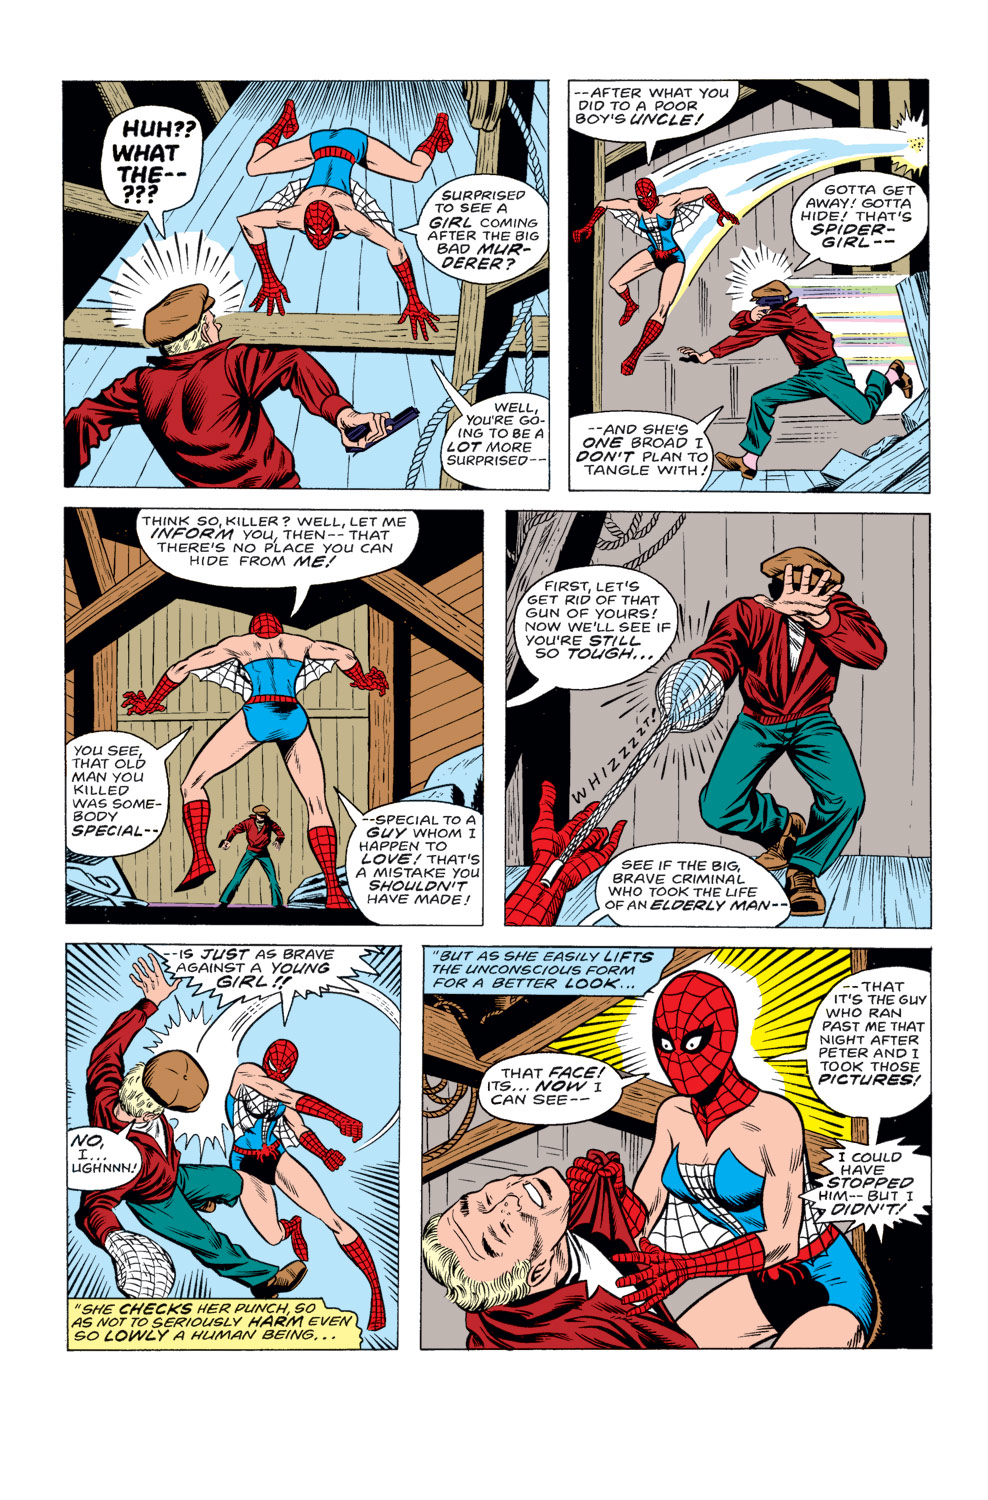 What If? (1977) issue 7 - Someone else besides Spider-Man had been bitten by a radioactive spider - Page 24